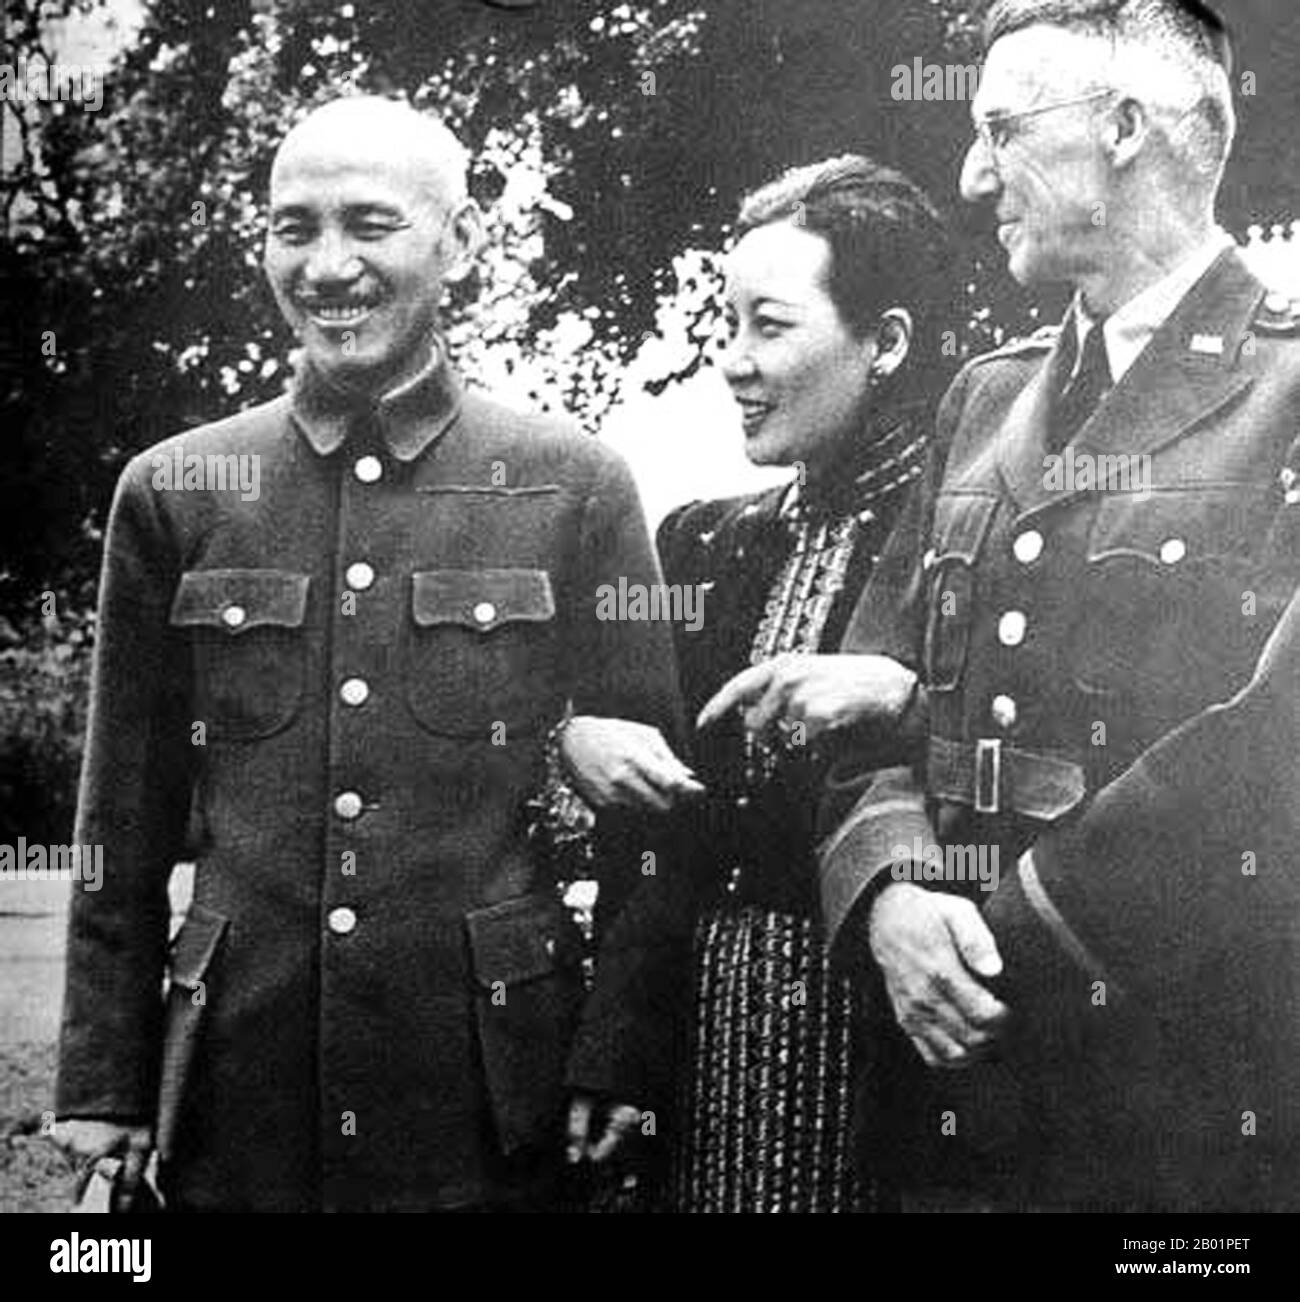 Burma/China/USA: Chiang Kai Shek, Soong May Ling and 'Vinegar Joe' Stilwell, Burma, 1942.  Chiang Kai-shek (31 October 1887 - 5 April 1975) was a political and military leader of 20th century China. He is known as Jiǎng Jièshí or Jiǎng Zhōngzhèng in Mandarin.  Soong May-ling/Mei-ling (5 March 1898 - 23 October 2003), also known as Madame Chiang Kai-shek, was First Lady of the Republic of China (ROC), the wife of former President Chiang Kai-shek.  General Joseph Warren Stilwell (19 March 1883 - 12 October 1946) was a US Army four-star general known for service in the China-Burma-India Theatre. Stock Photo